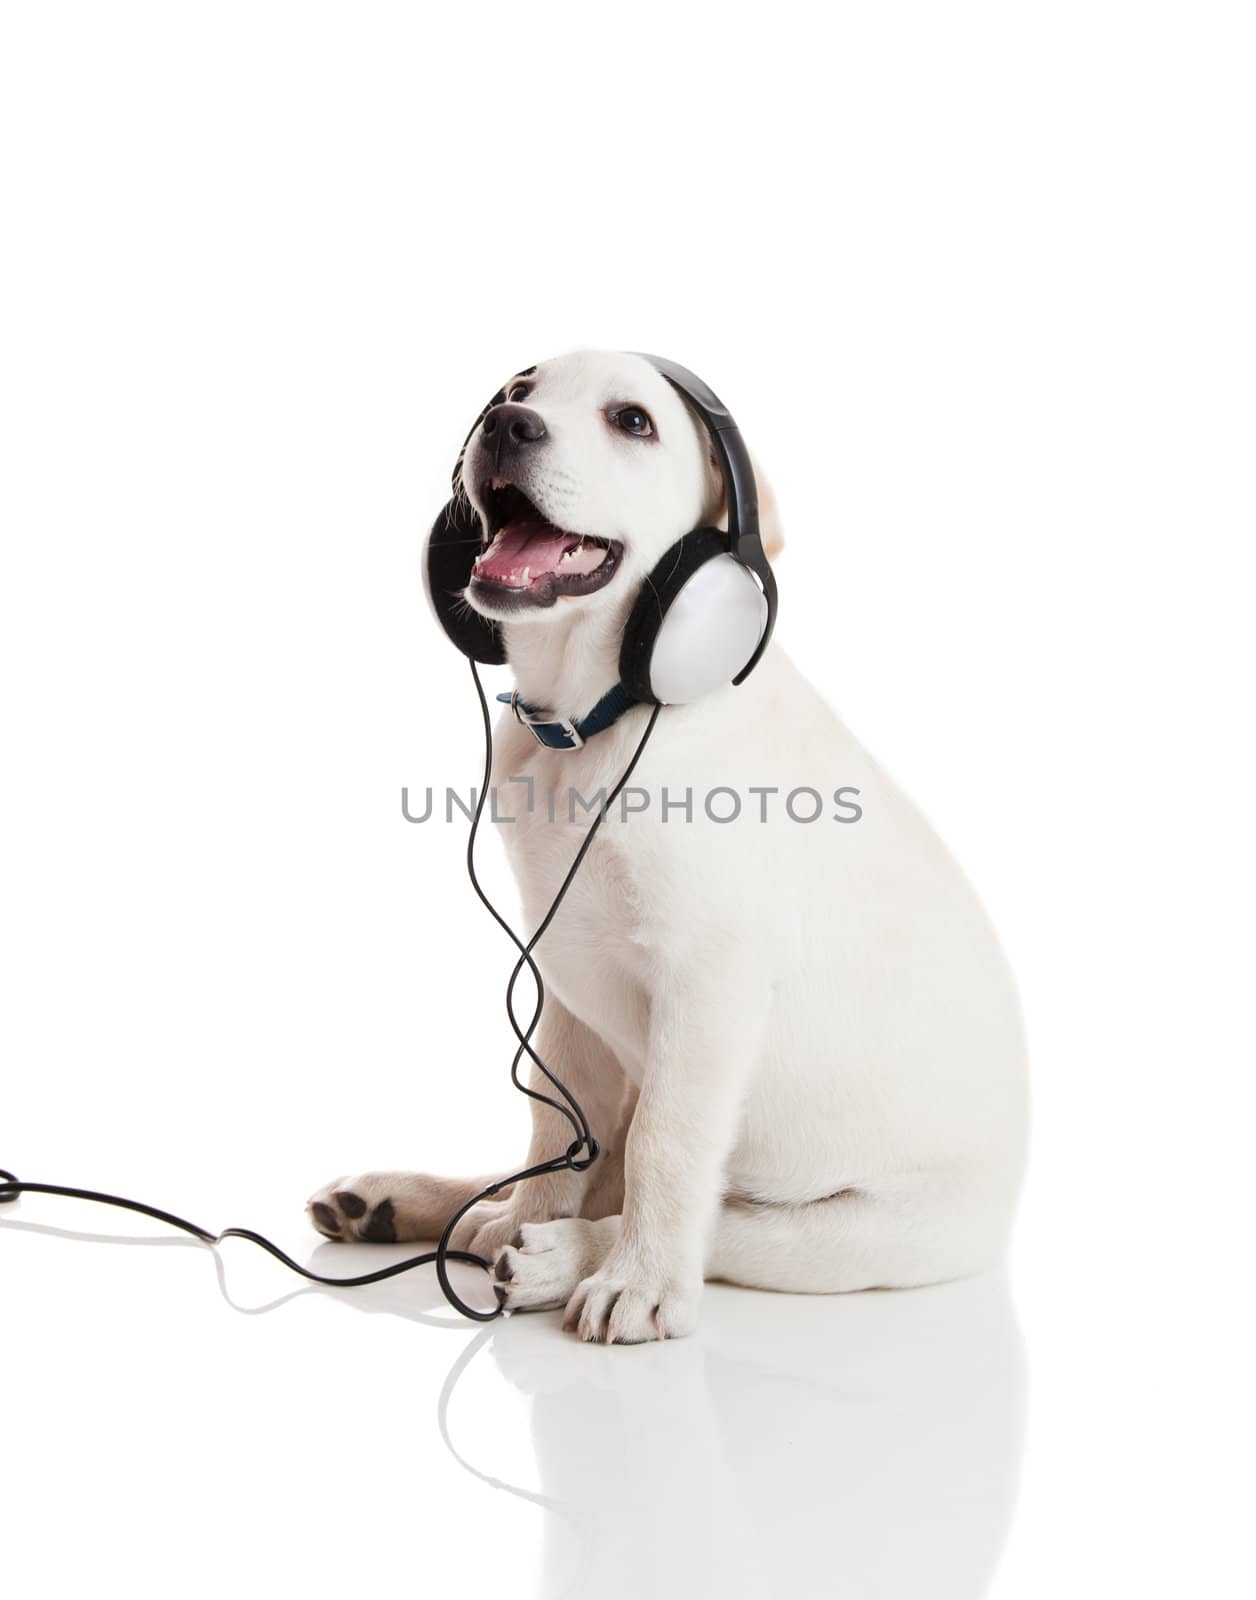 Dog listening to music by Iko